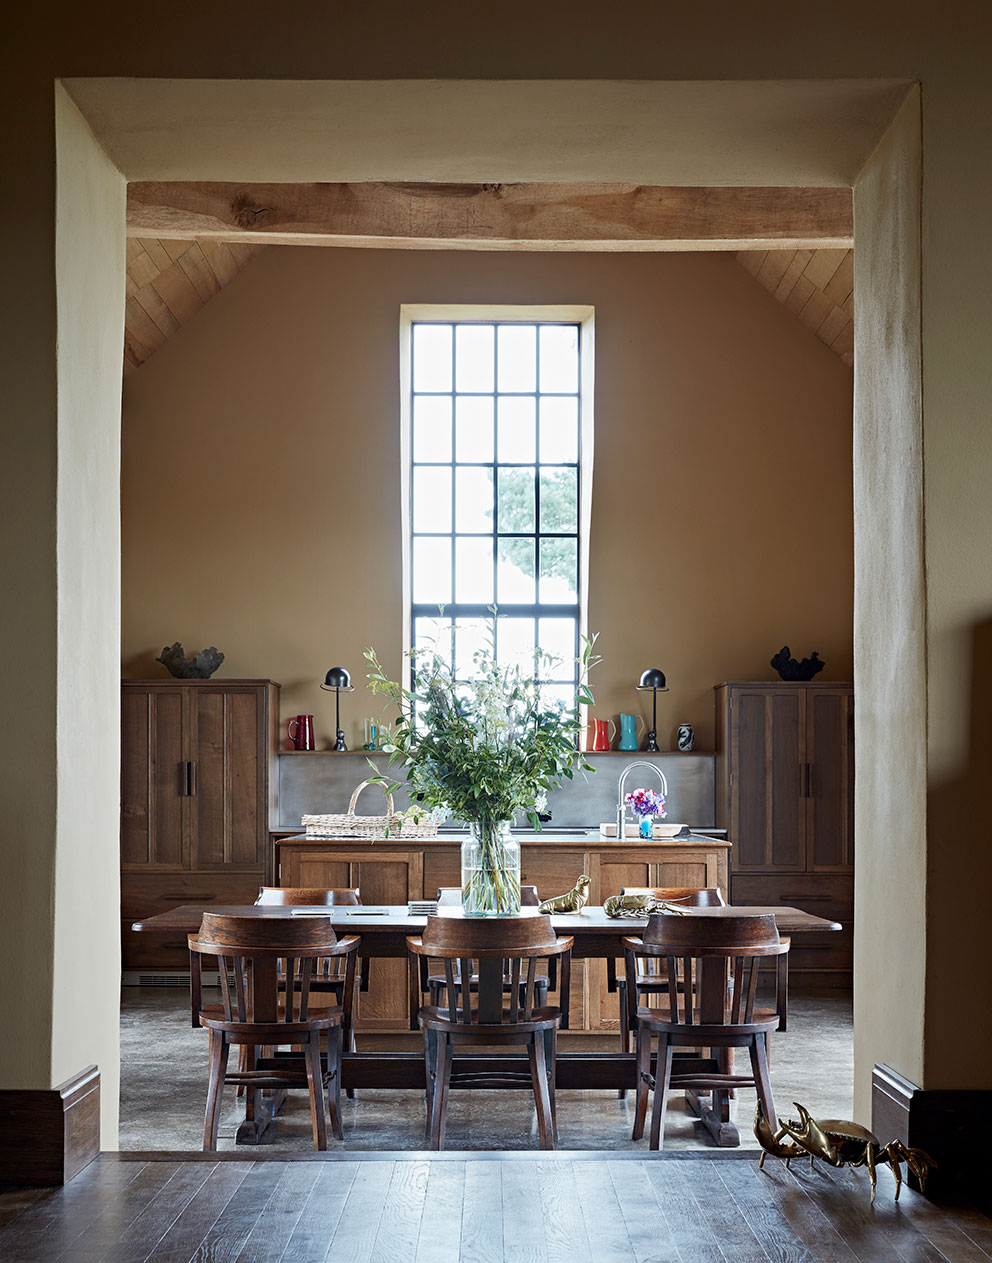 A view of the stunning bespoke kitchen / diner of a luxury rural home with double-height ceilings, dark wooden furniture and soft muted natural walls.